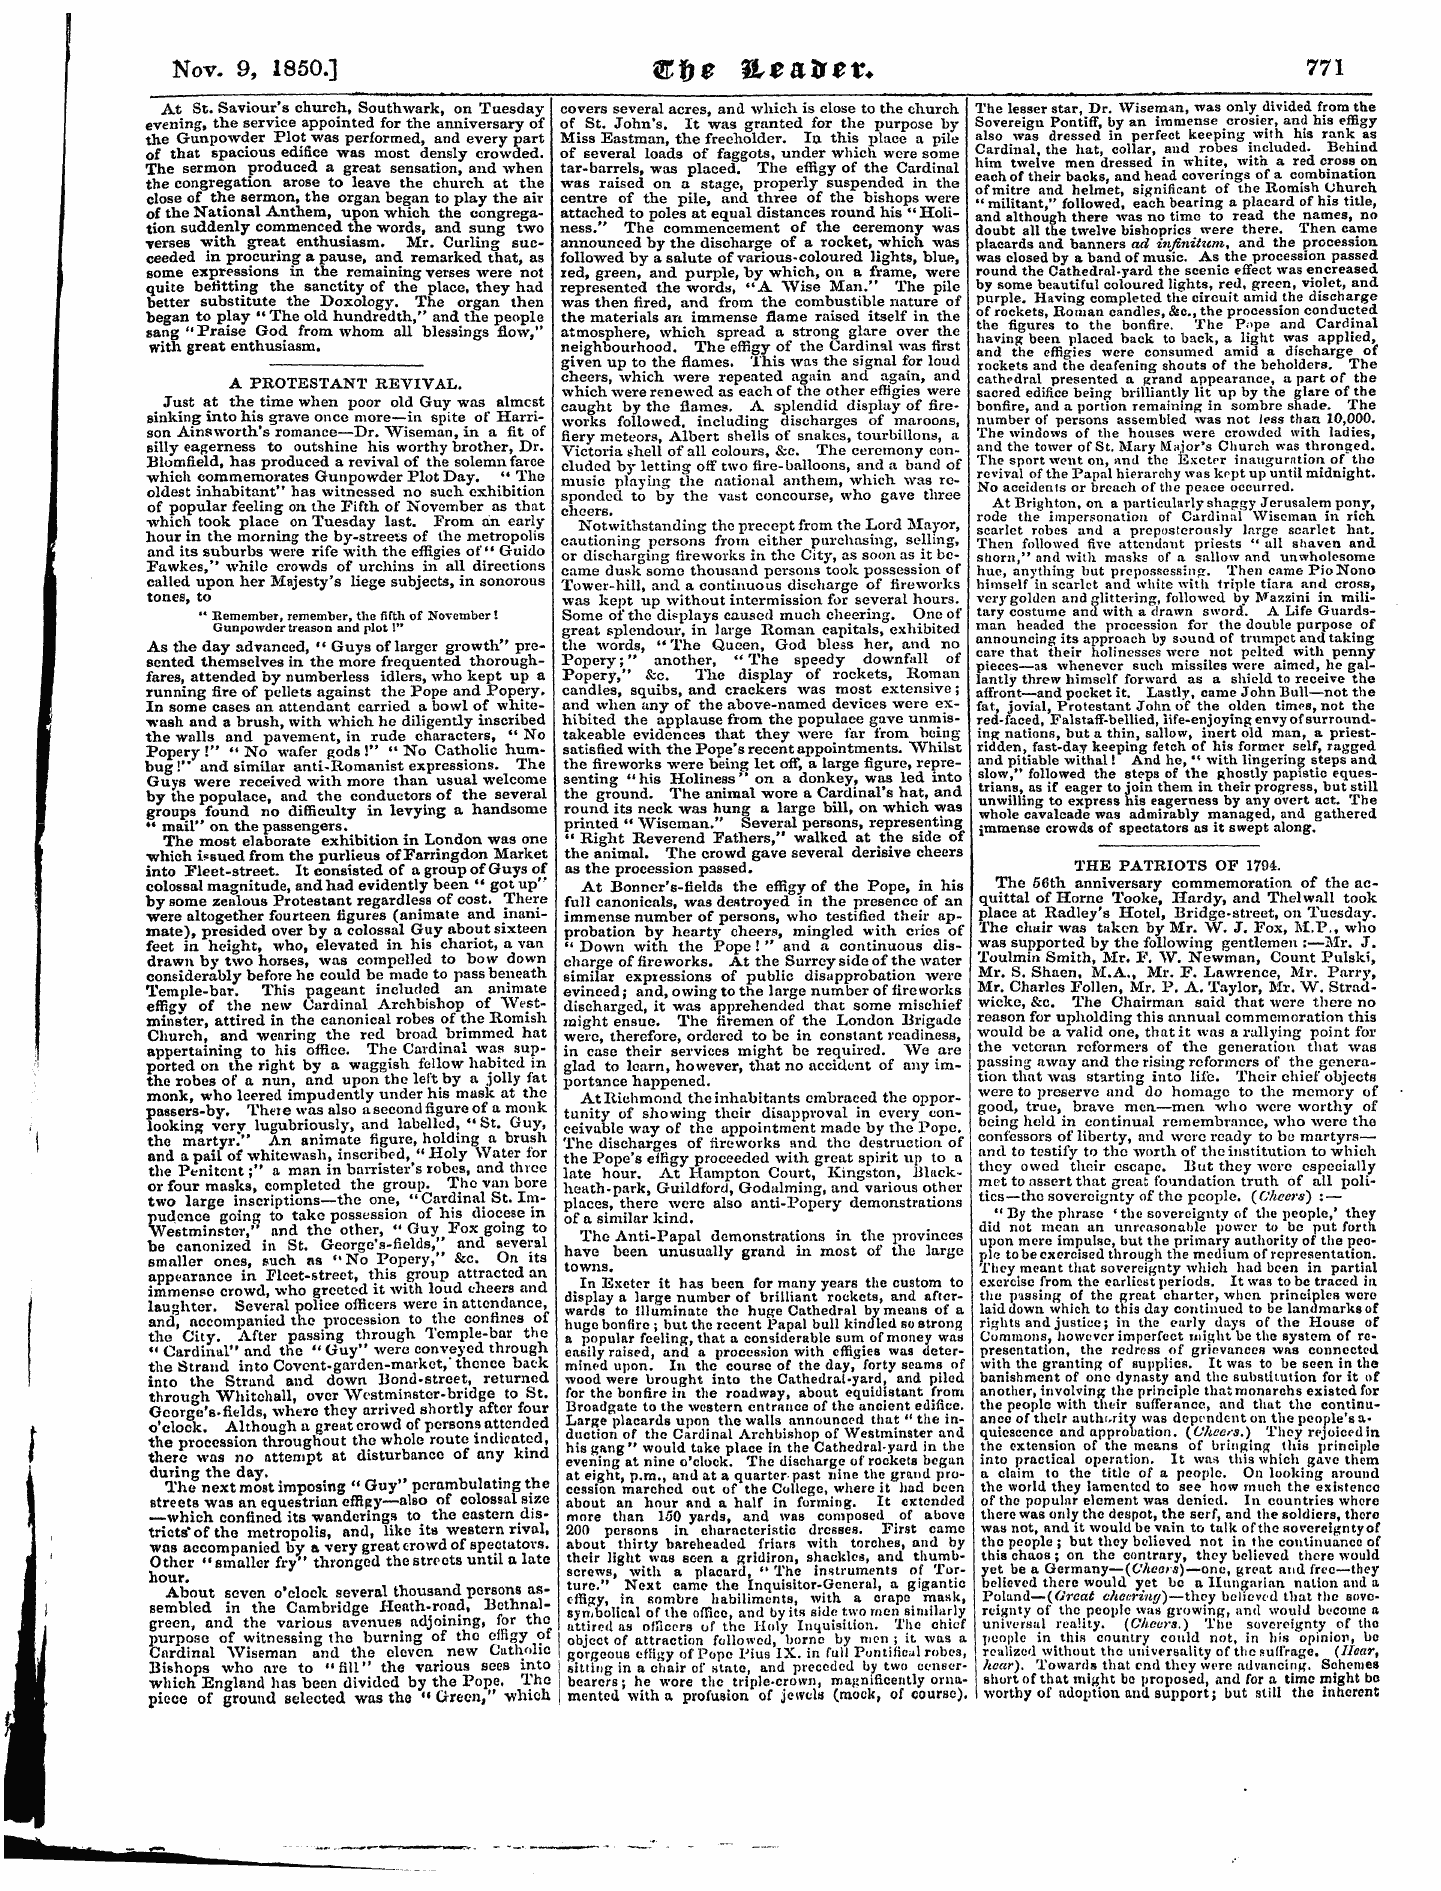 Leader (1850-1860): jS F Y, Town edition - Untitled Article